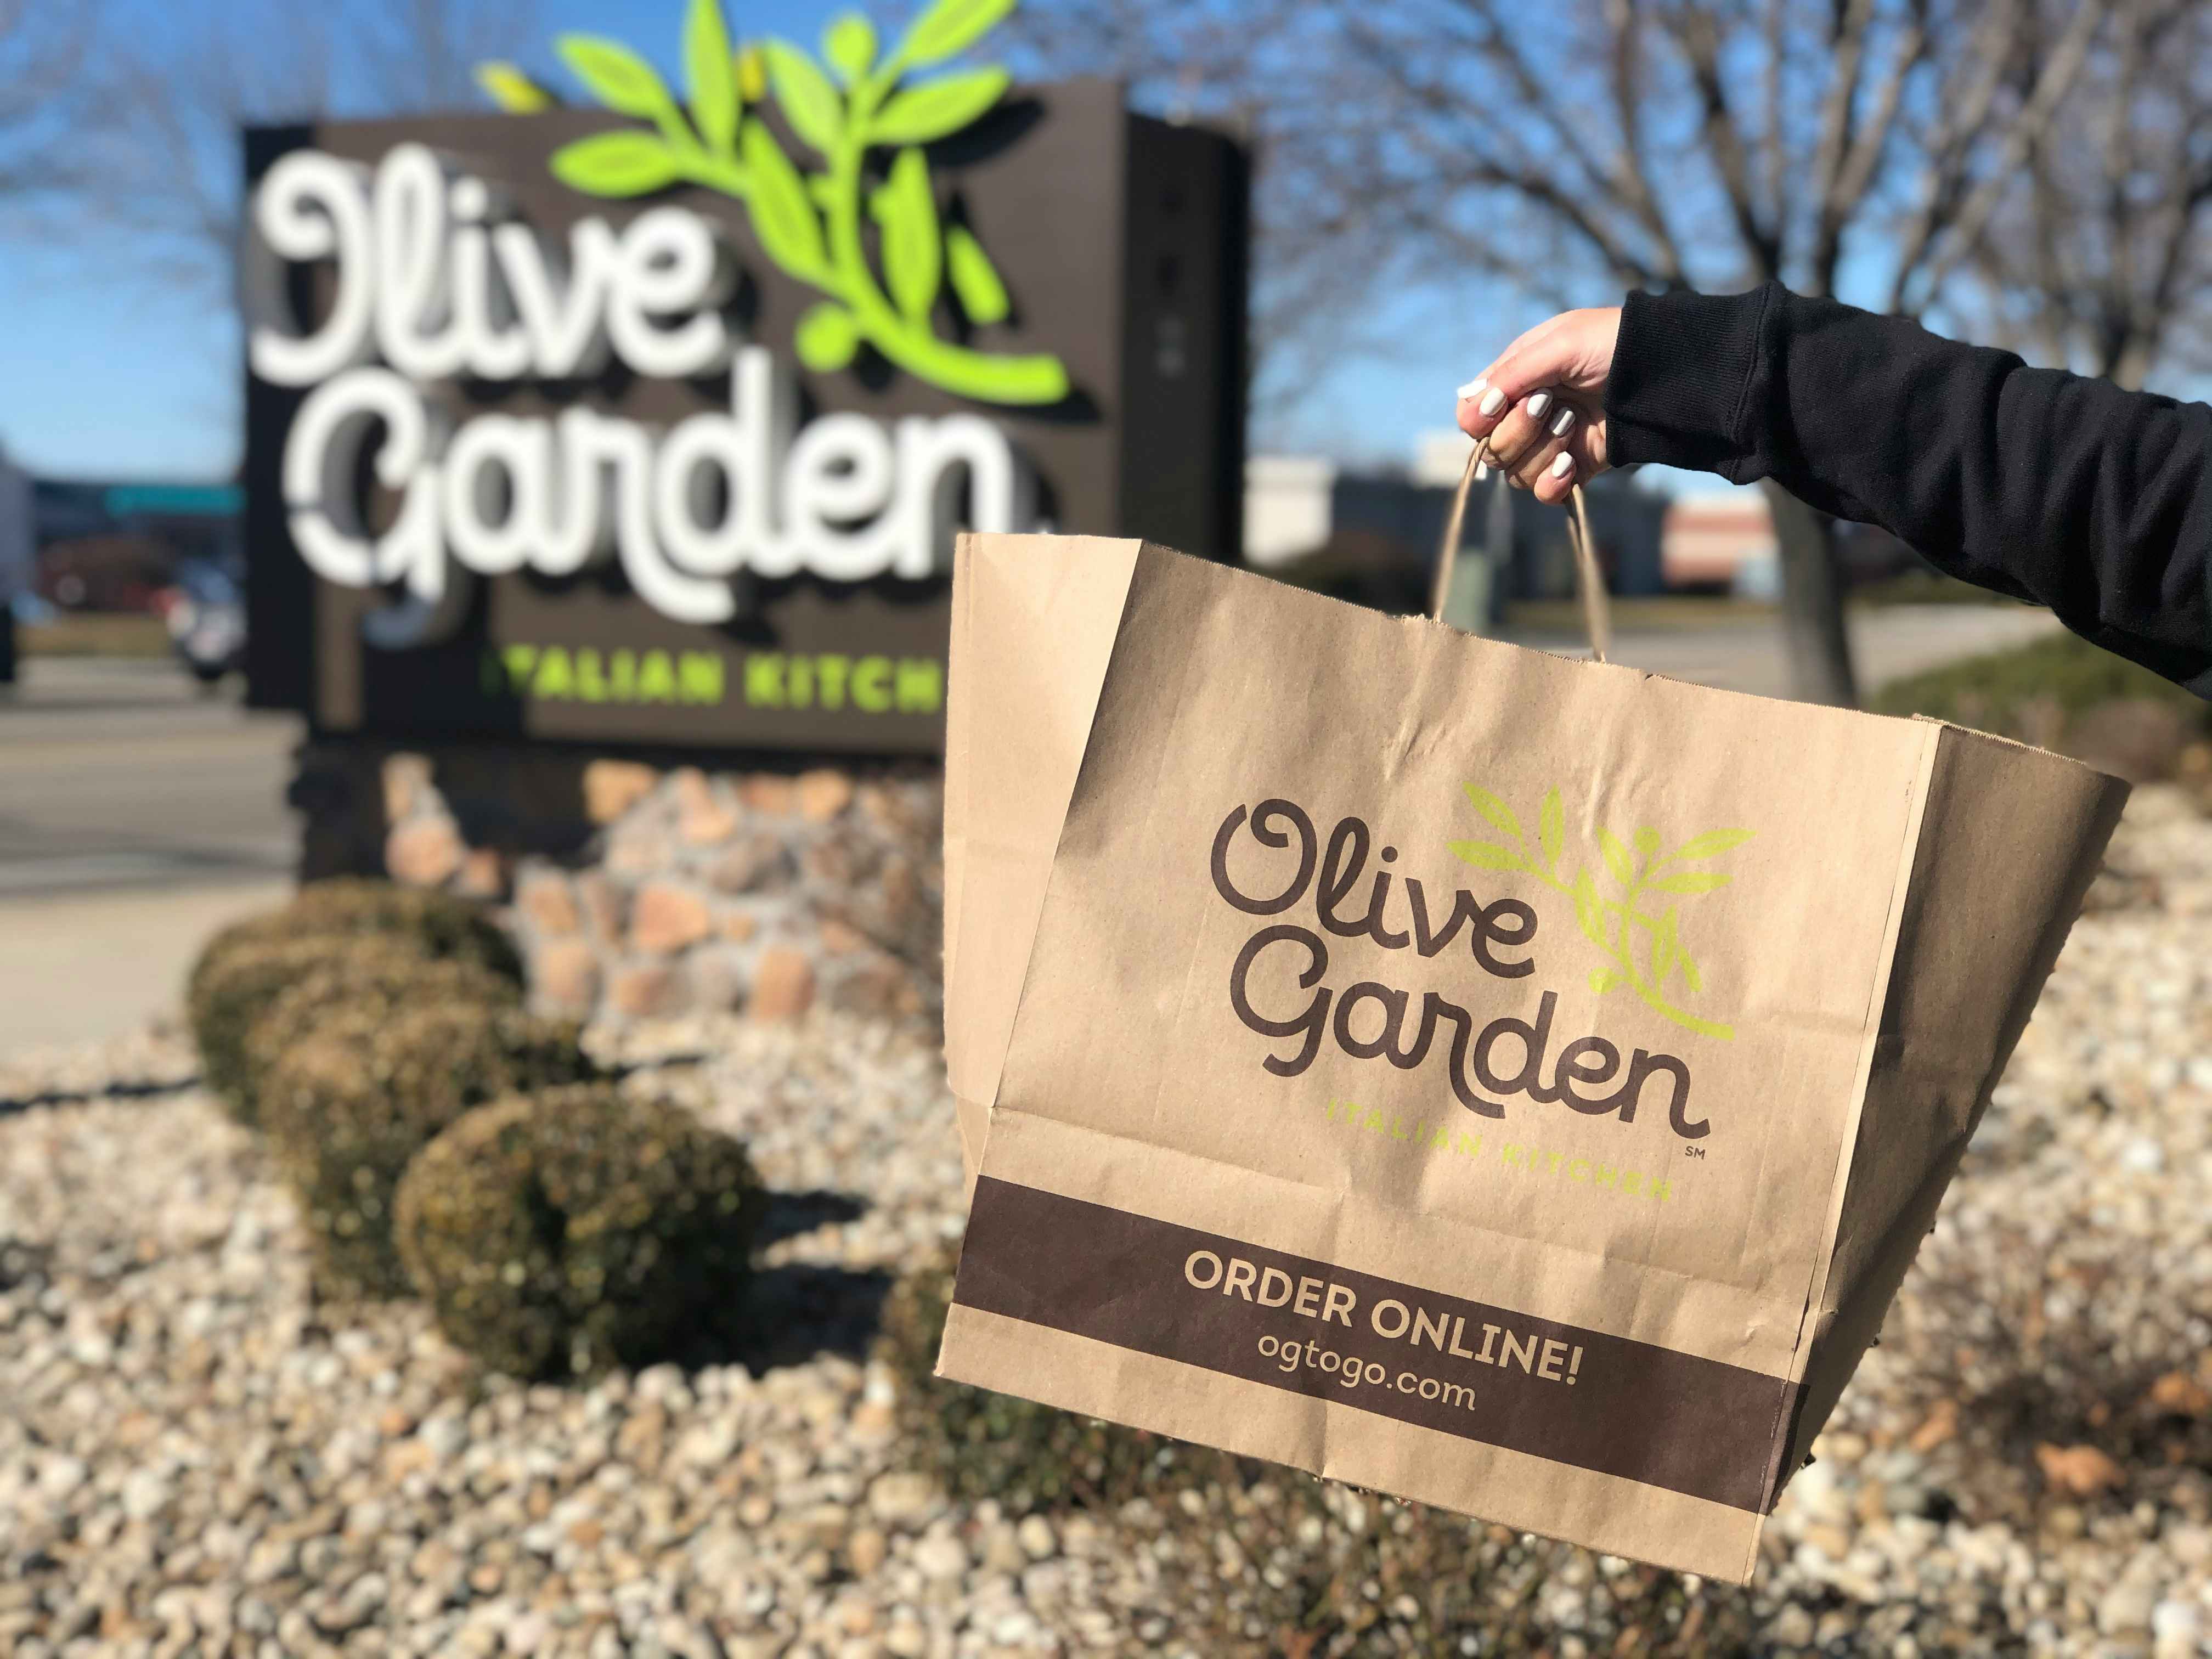 Someone holding an Olive Garden to go bag in front of an Olive Garden sign